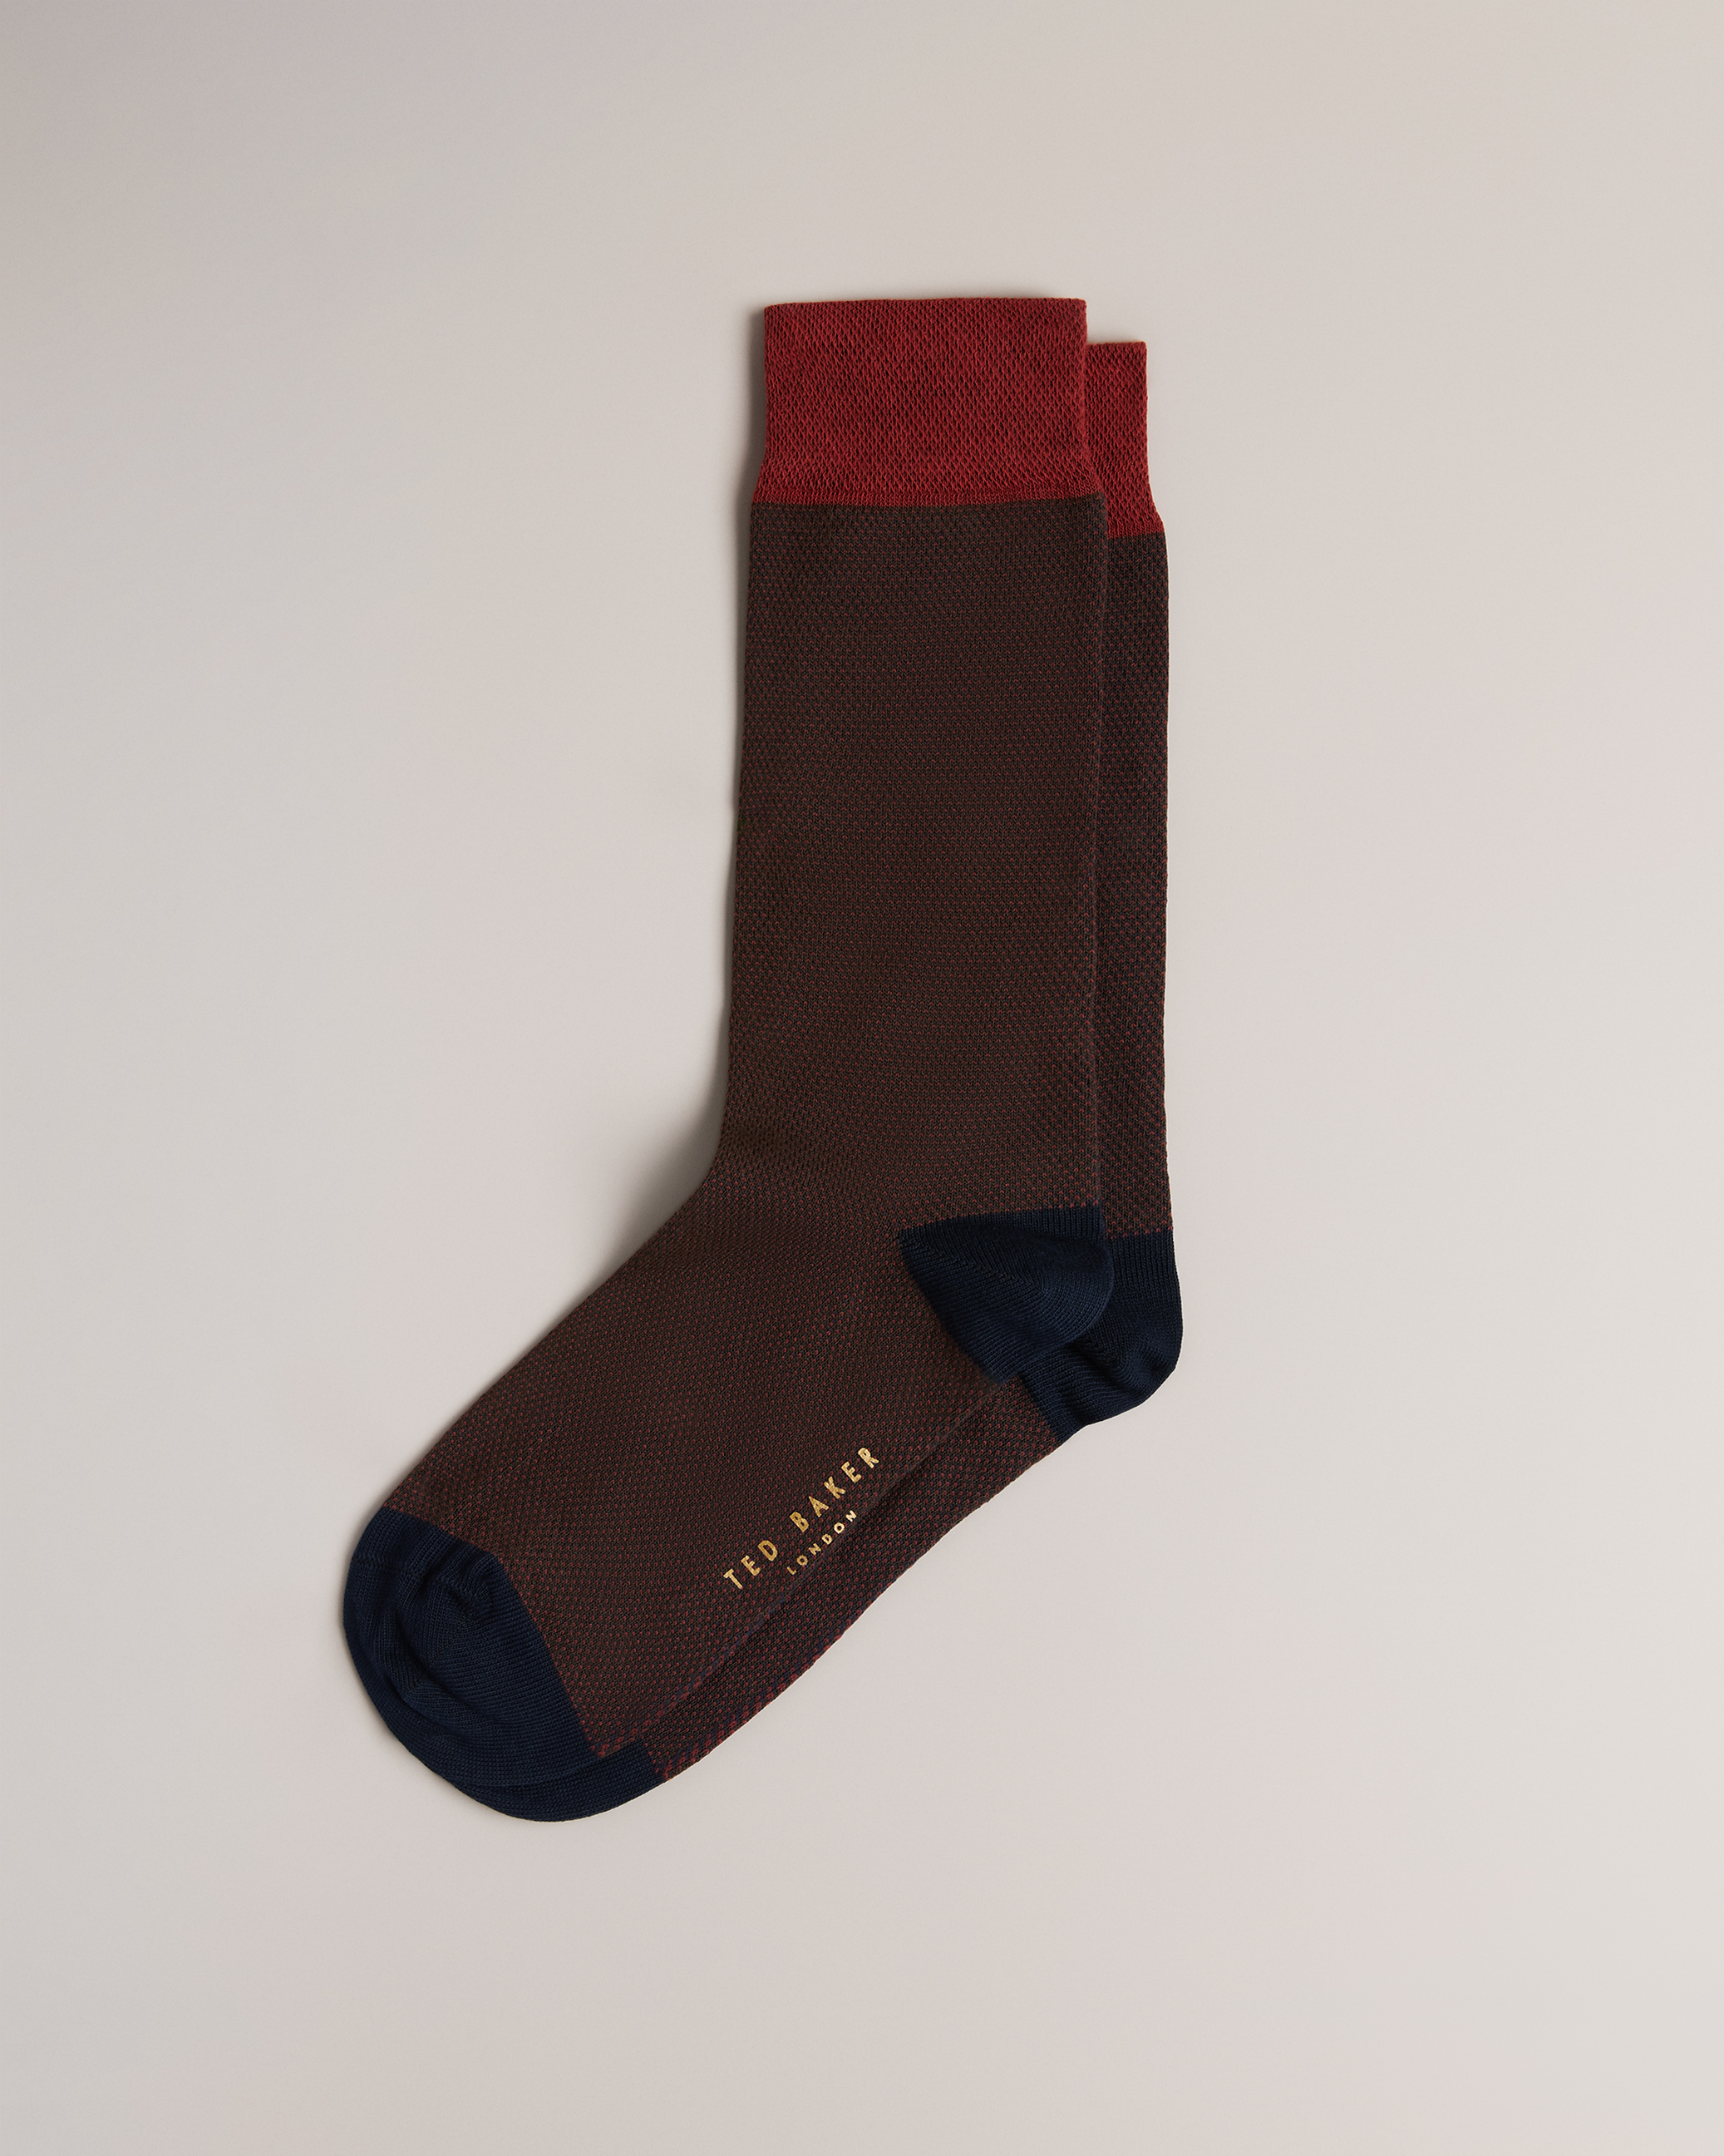 Ted Baker Sock Tedtext- Buy Online from Pettits, est 1860